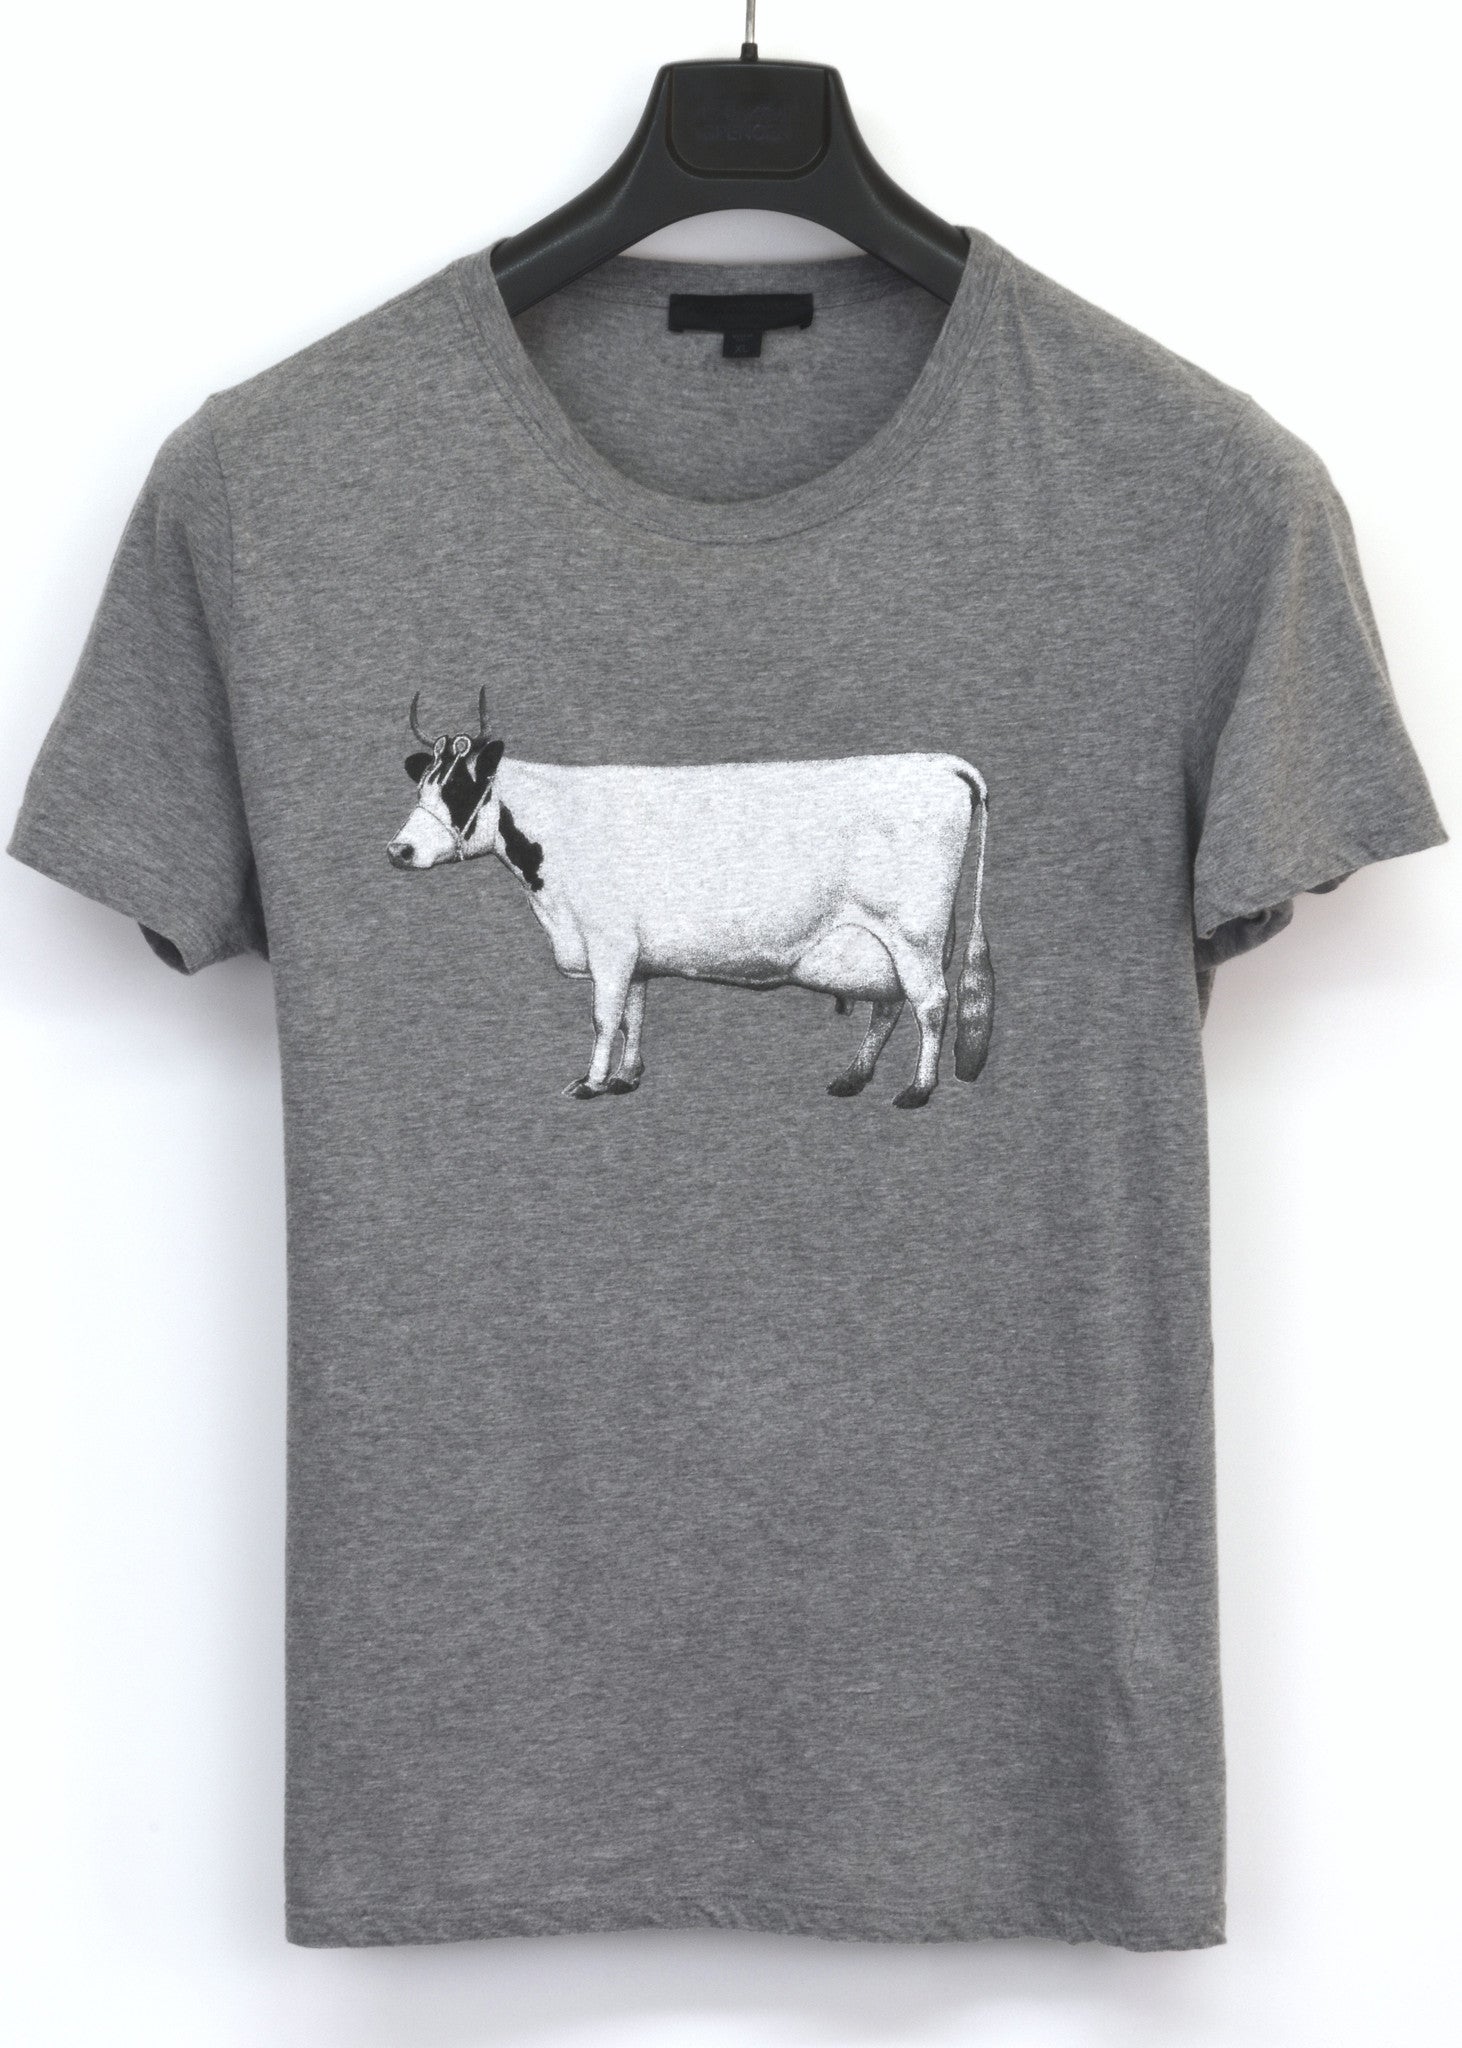 2011 Soft Jersey 'Prize Cow' T-Shirt